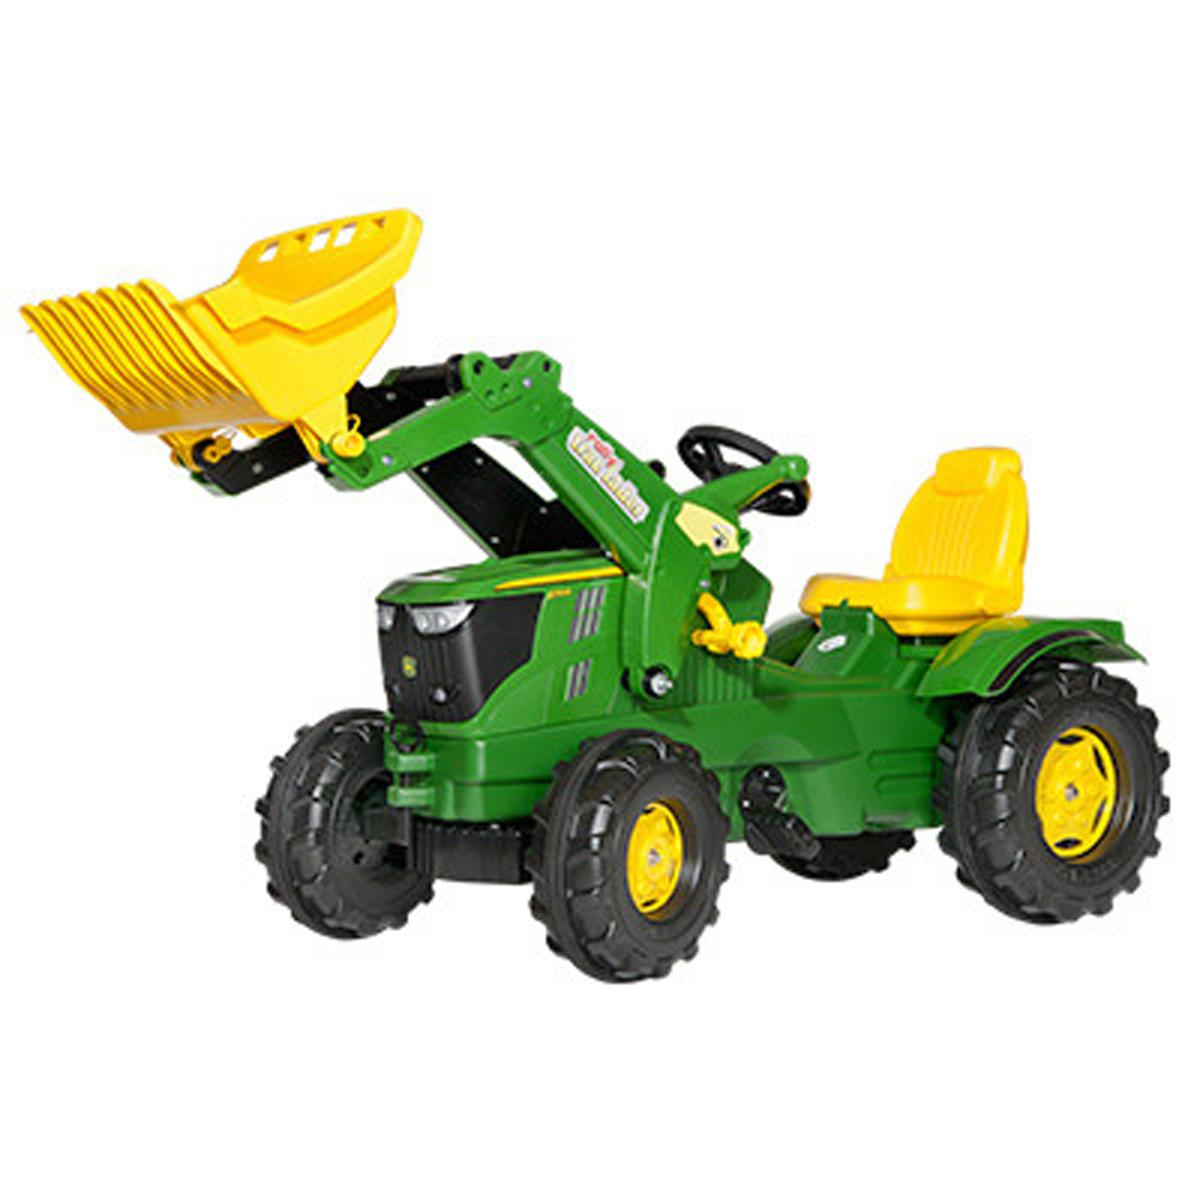 John Deere Farmtrac Pedal Tractor With Loader